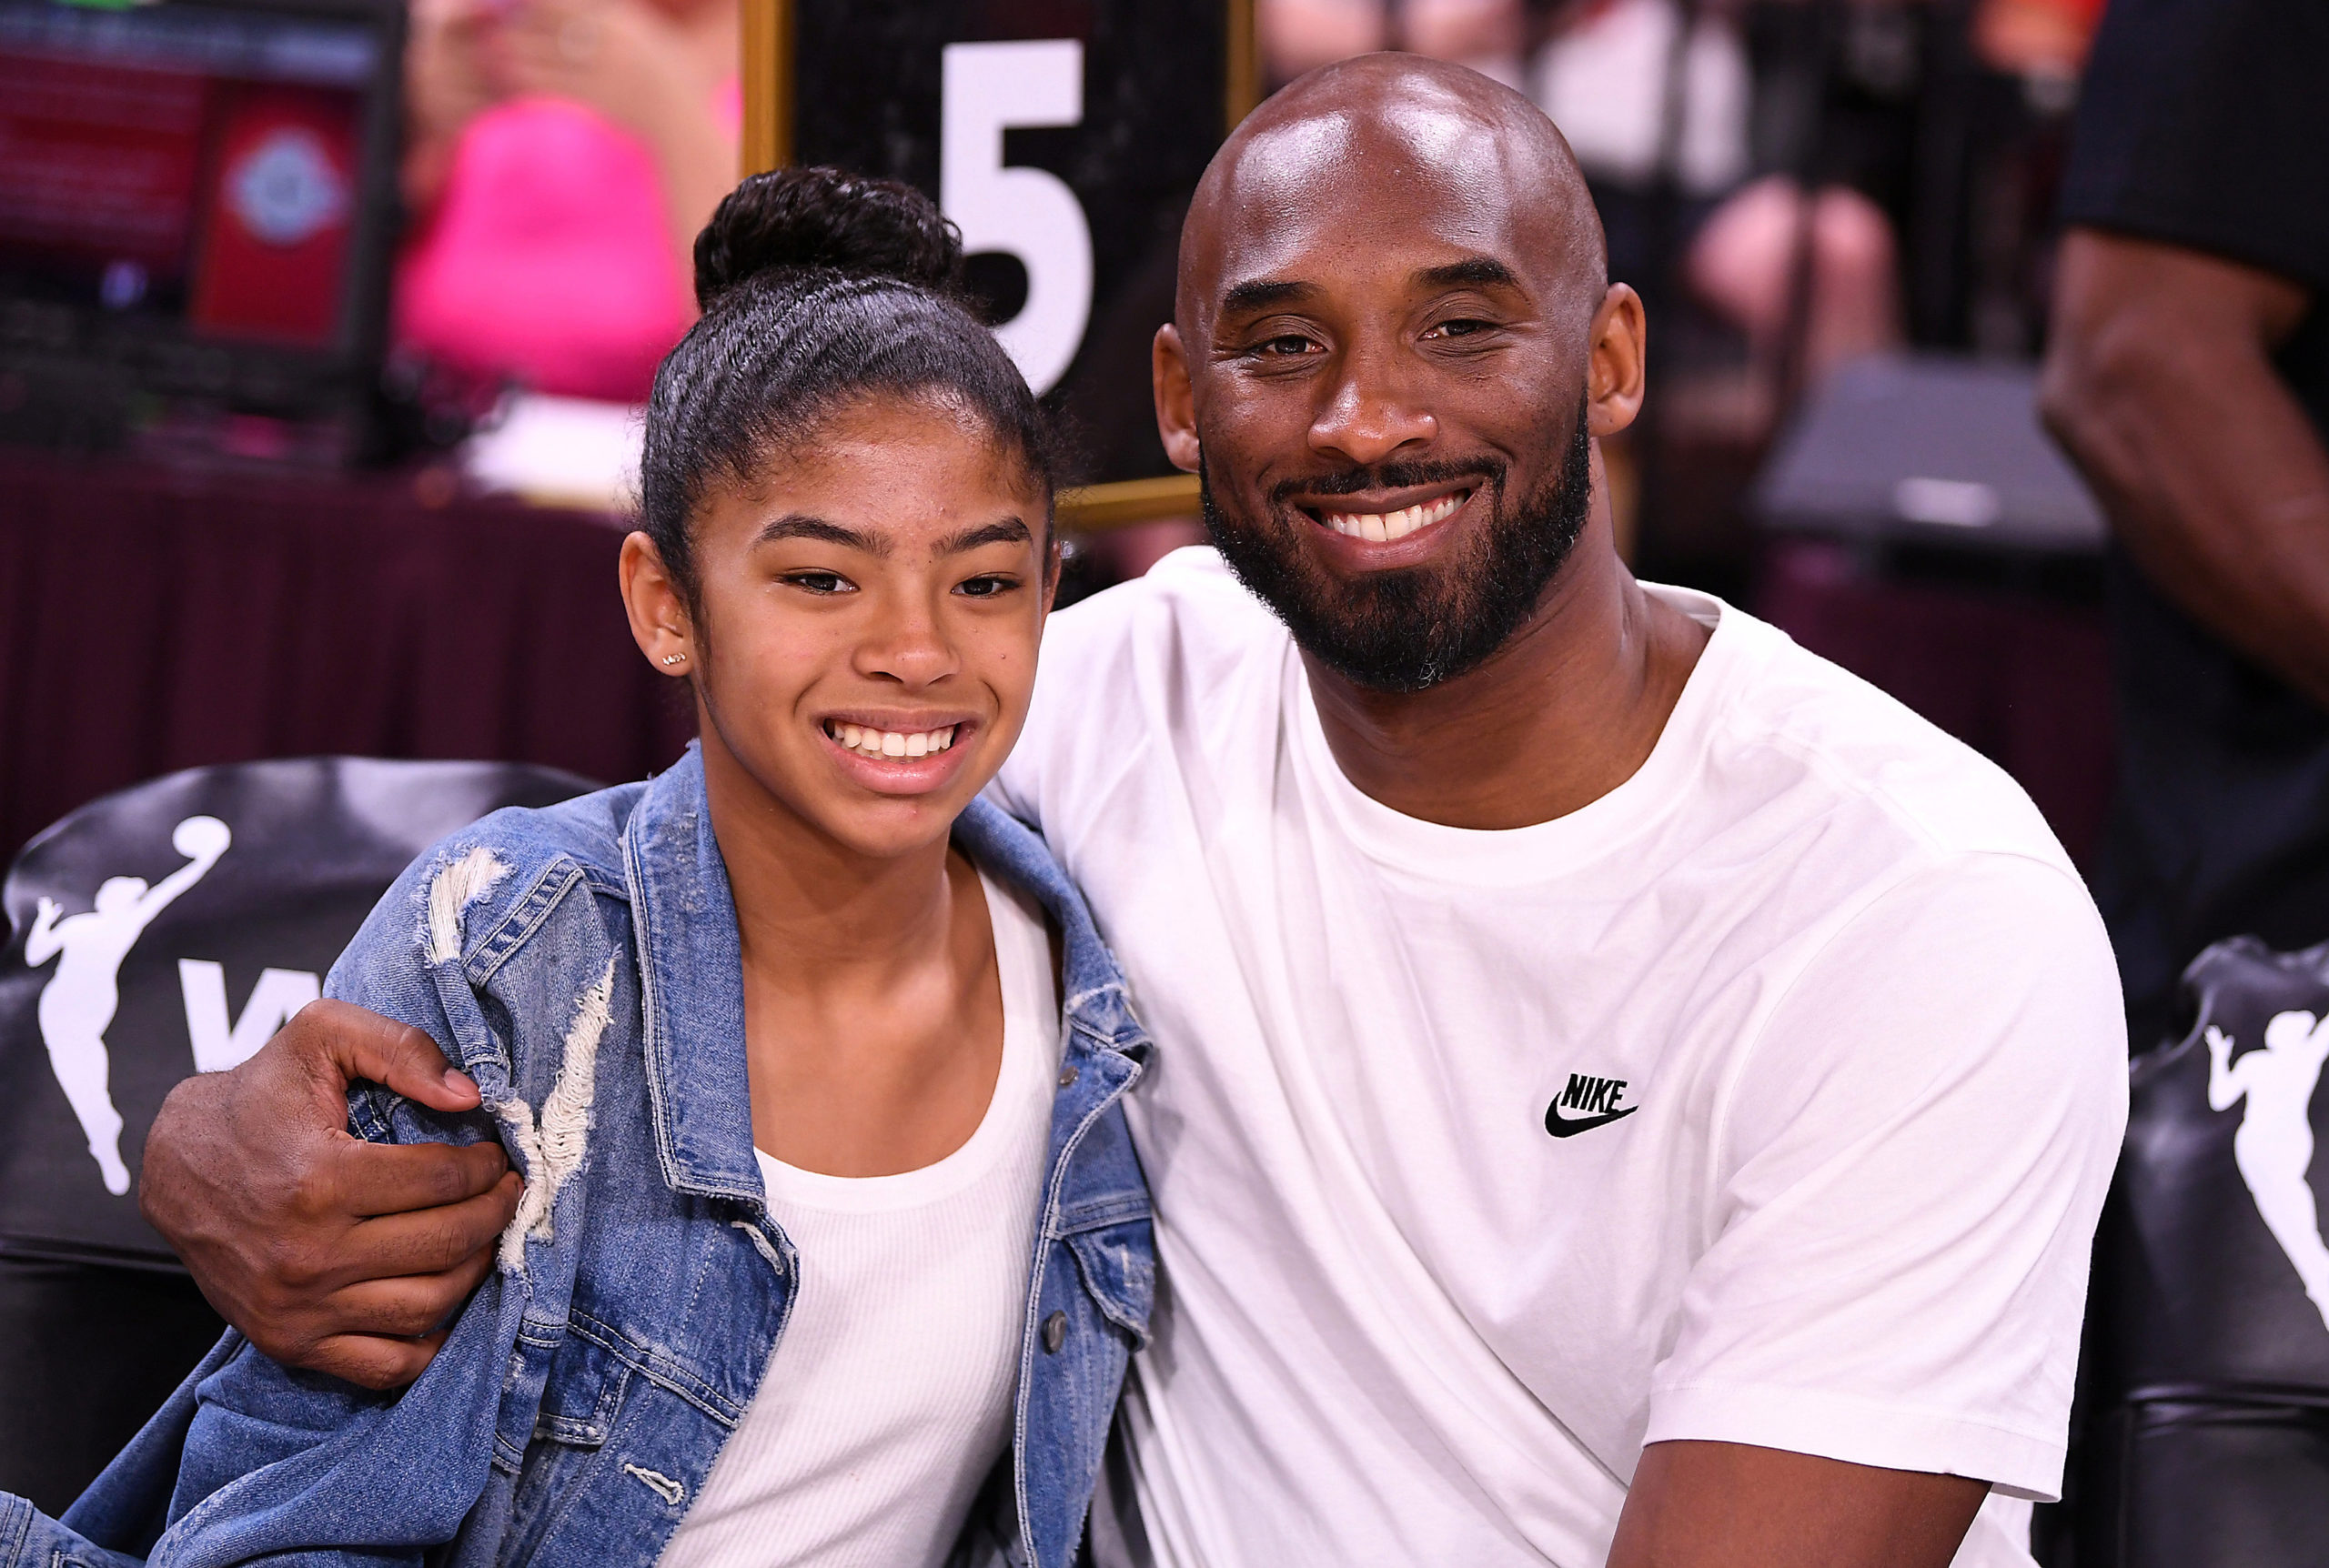 Trending Video: Ghanaians hold funeral service for Kobe Bryant and daughter